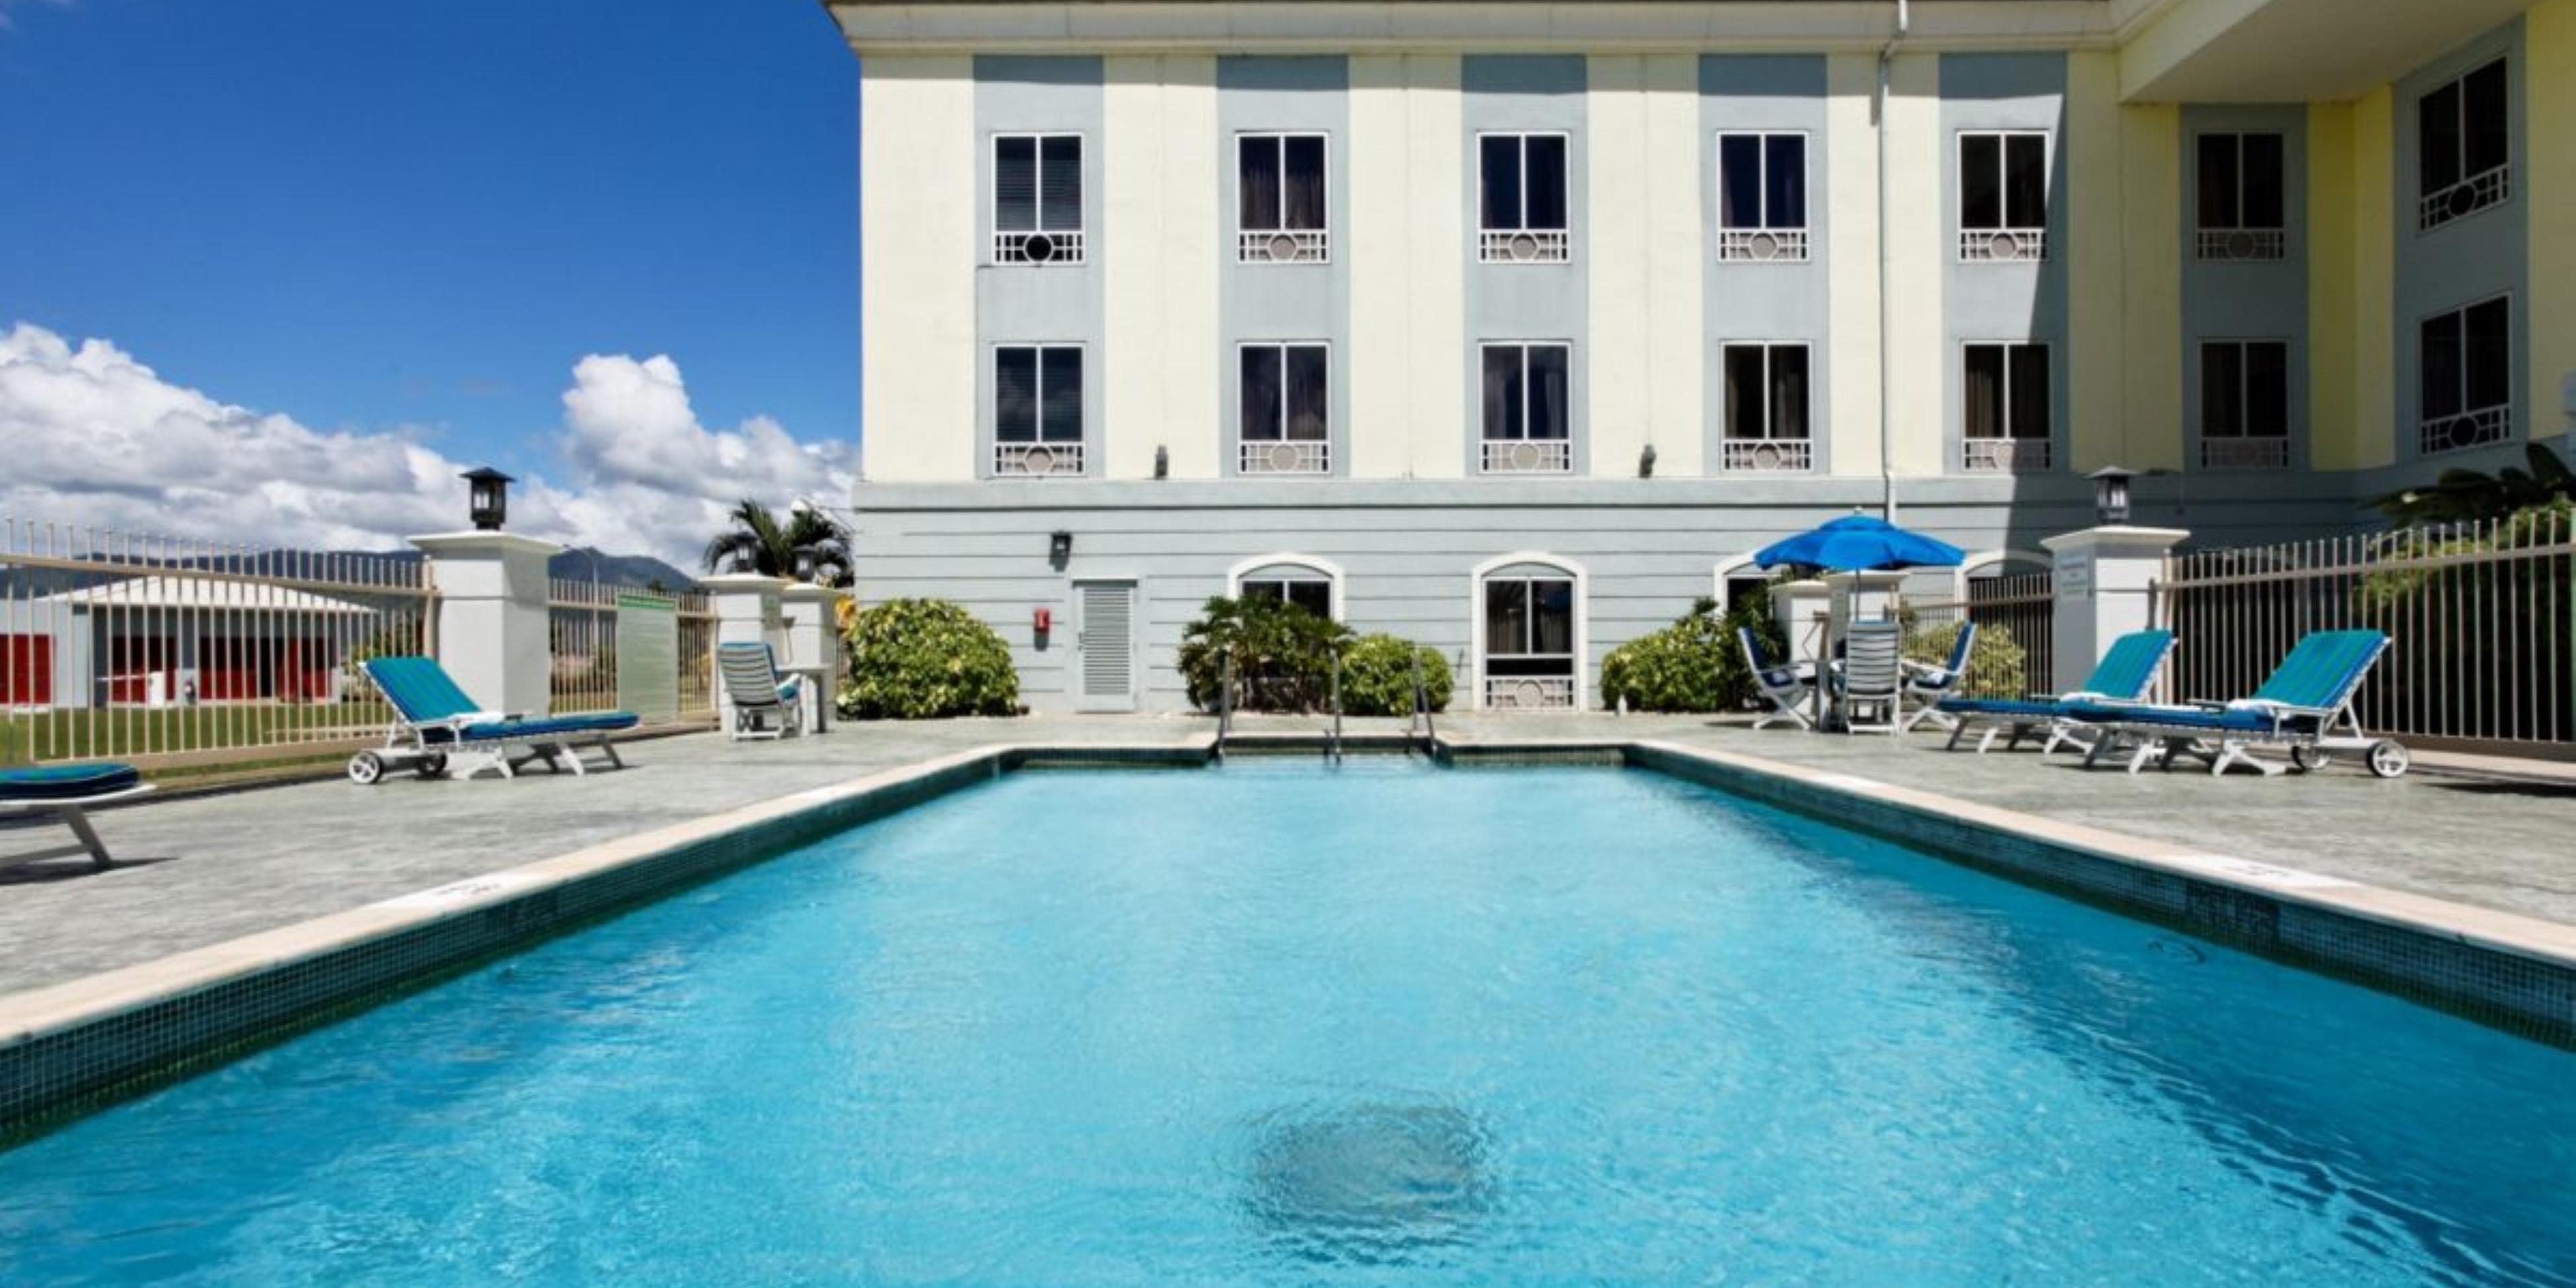 Pool side view of hotel